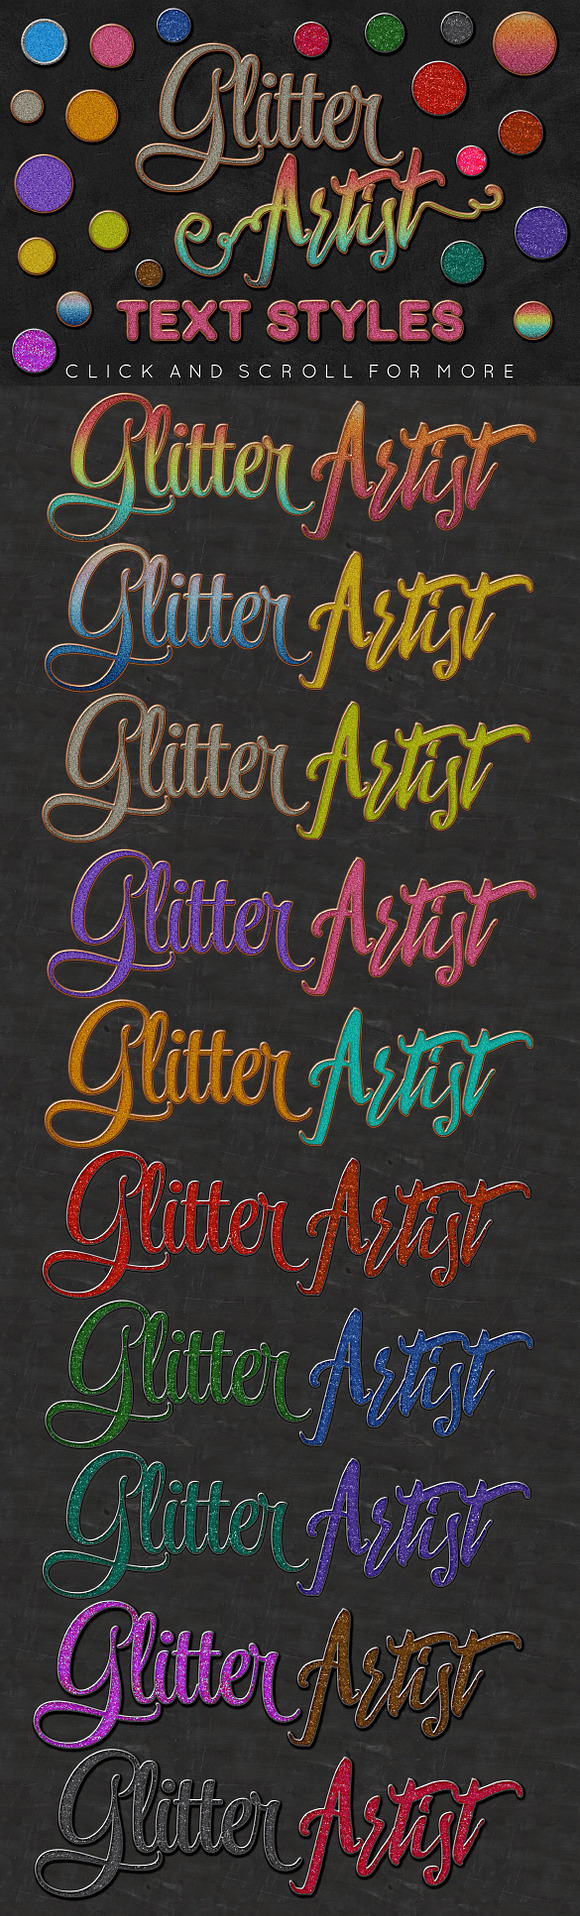 Glitter Artist in Photoshop Layer Styles - product preview 1